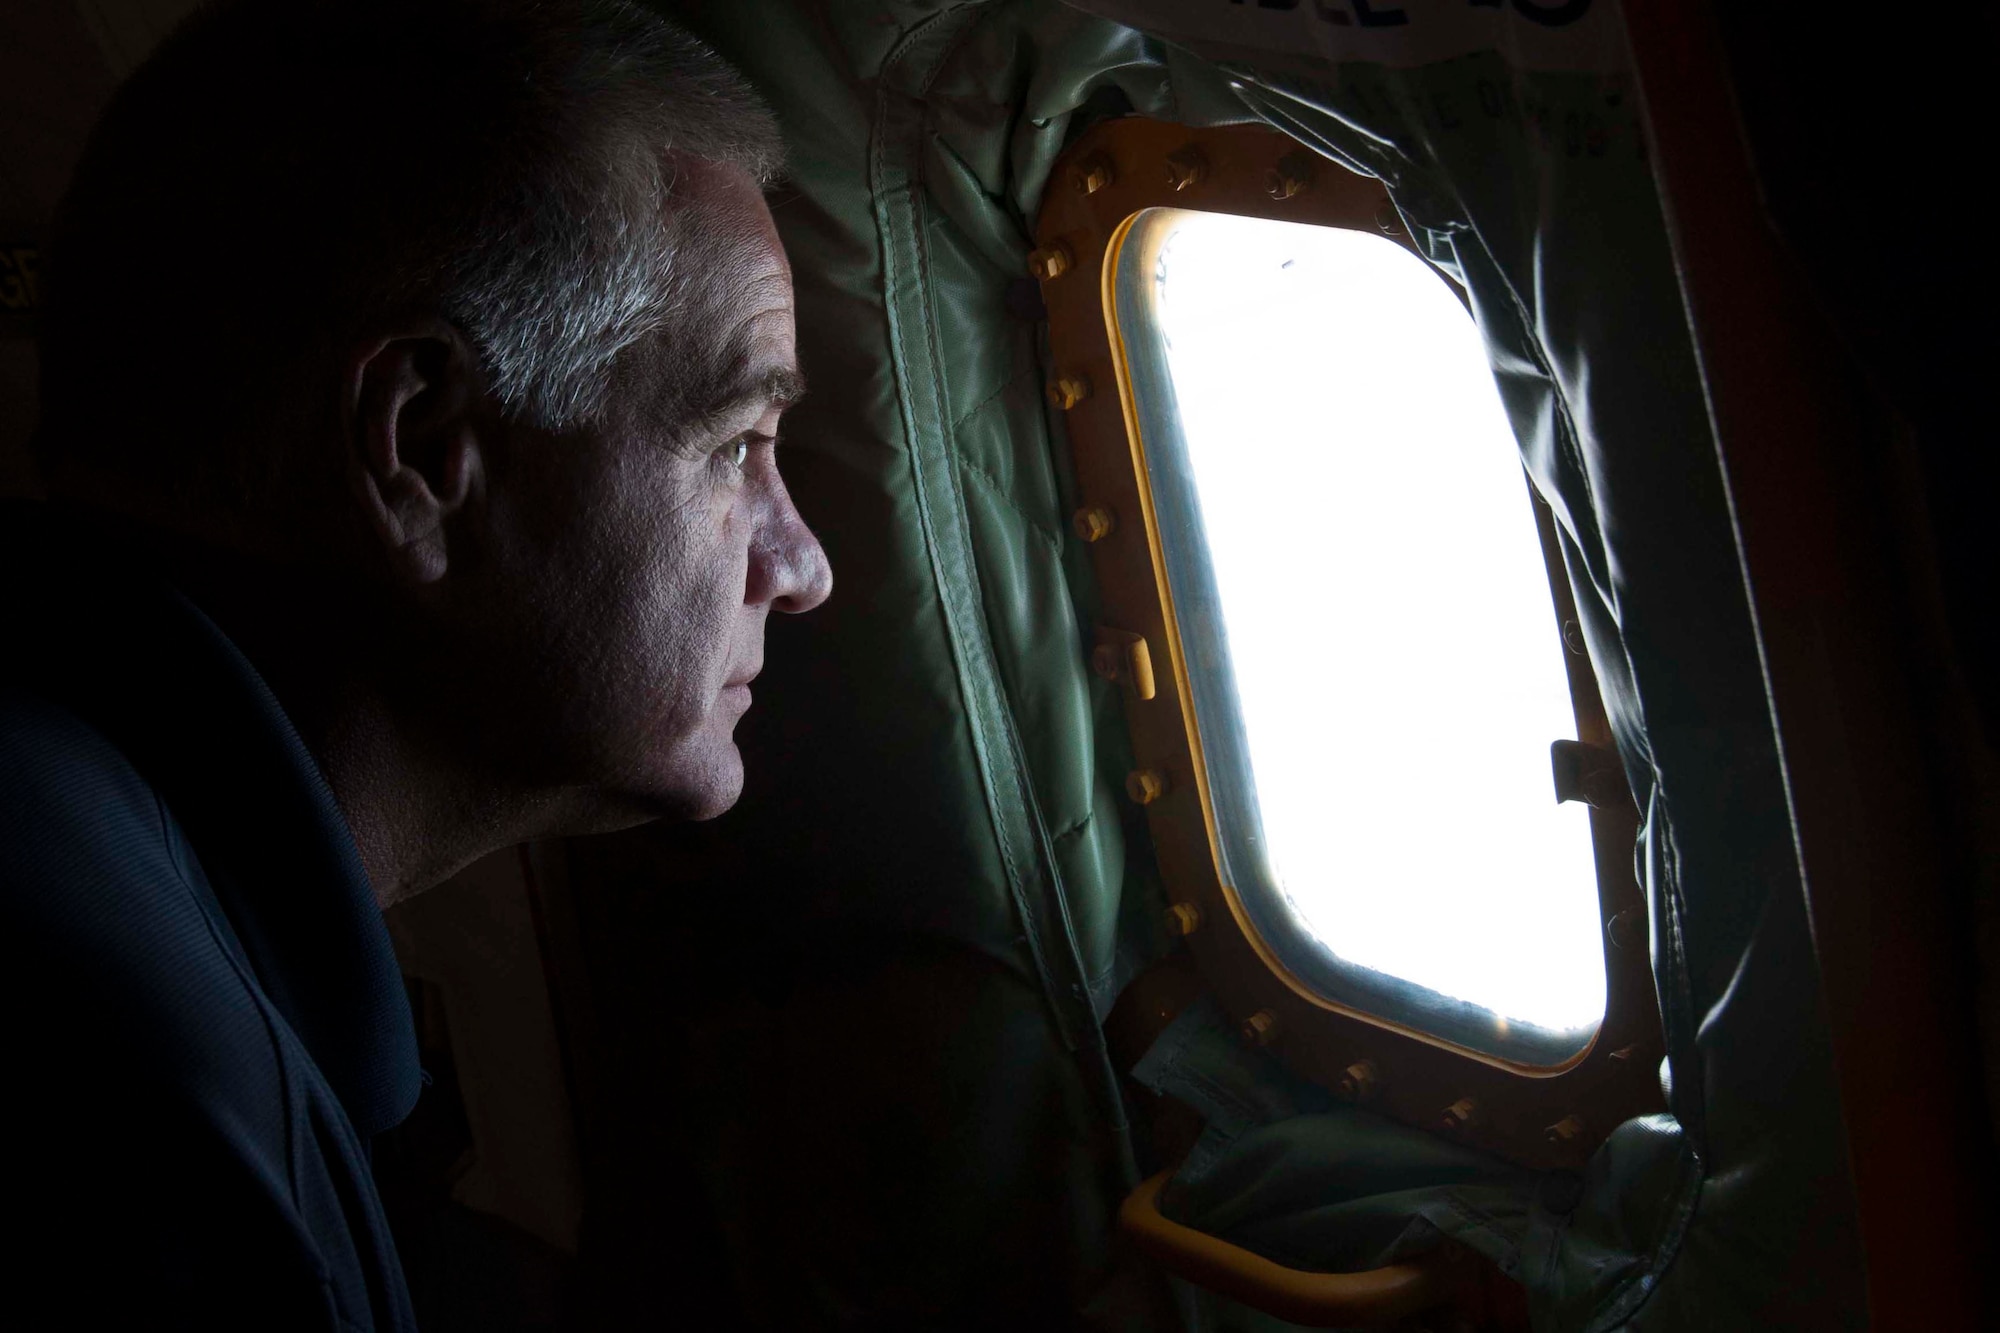 Tom Madden peers out the window of a KC-135 Stratotanker during a refueling mission out of Barksdale Air Force Base, La., May 14, 2016.  Madden, a Louisiana State Trooper, took part in an Employer Appreciation Day hosted by the 307th Bomb Wing.  Members of the 307th BW nominated their employers to spend the day learning more about the U.S. Air Force Reserve and 307th BW and enjoying a refueling flight.  (U.S. Air Force photo by Tech. Sgt. Ted Daigle/released)  